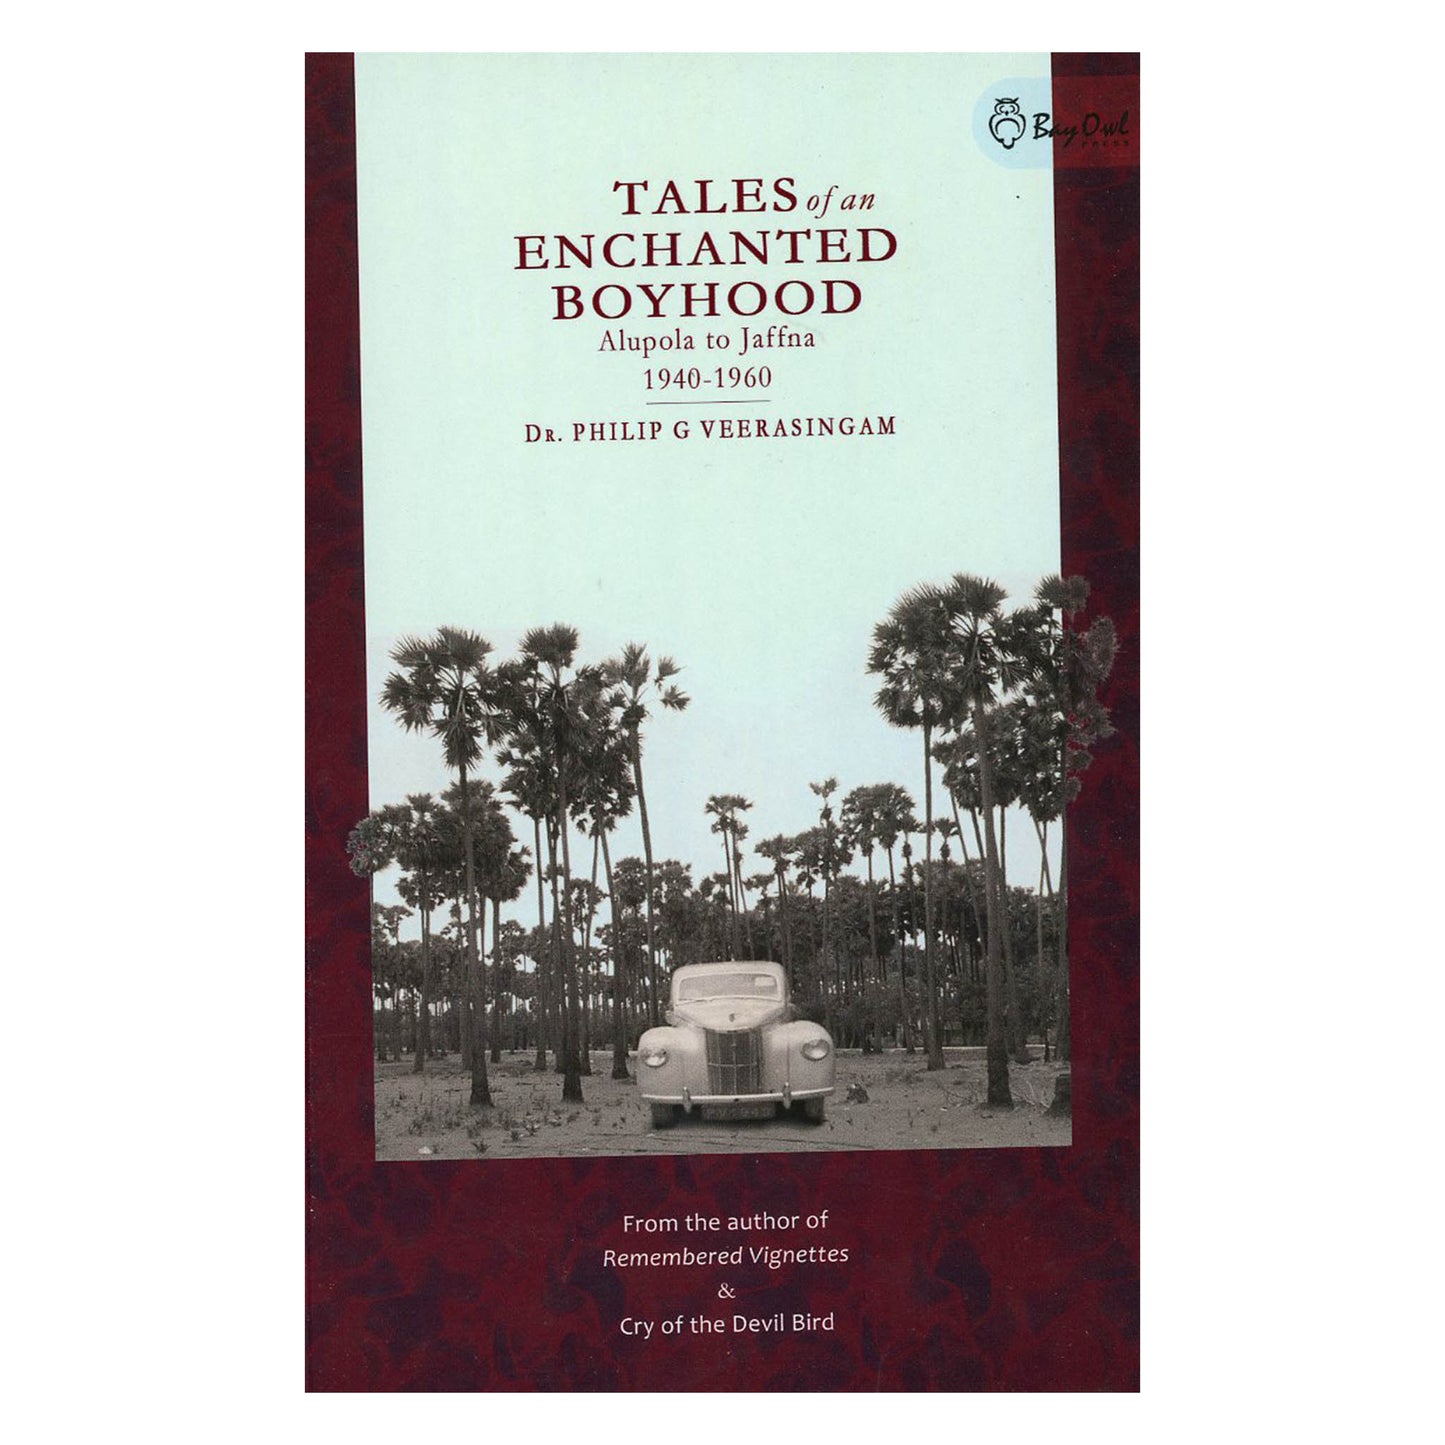 Tales of an Encharted Boyhood: Alupola to Jaffna (1940-1960) by Dr. Philip G Veersingam